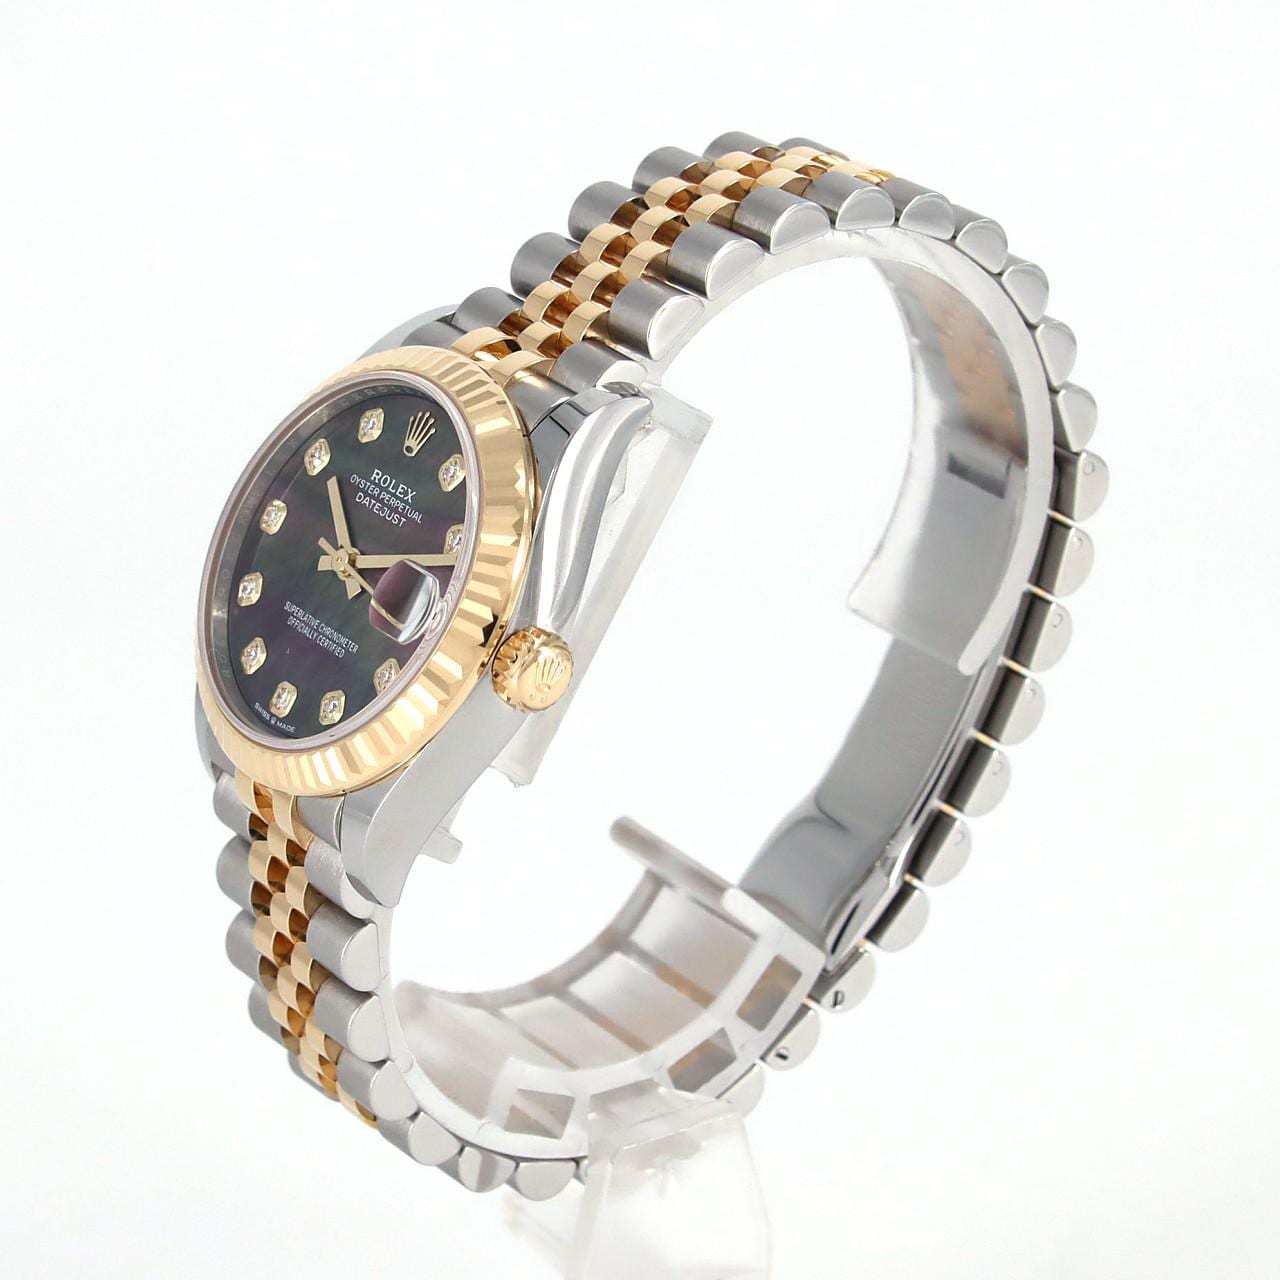 ROLEX Datejust 278273NG SSxYG Automatic random number